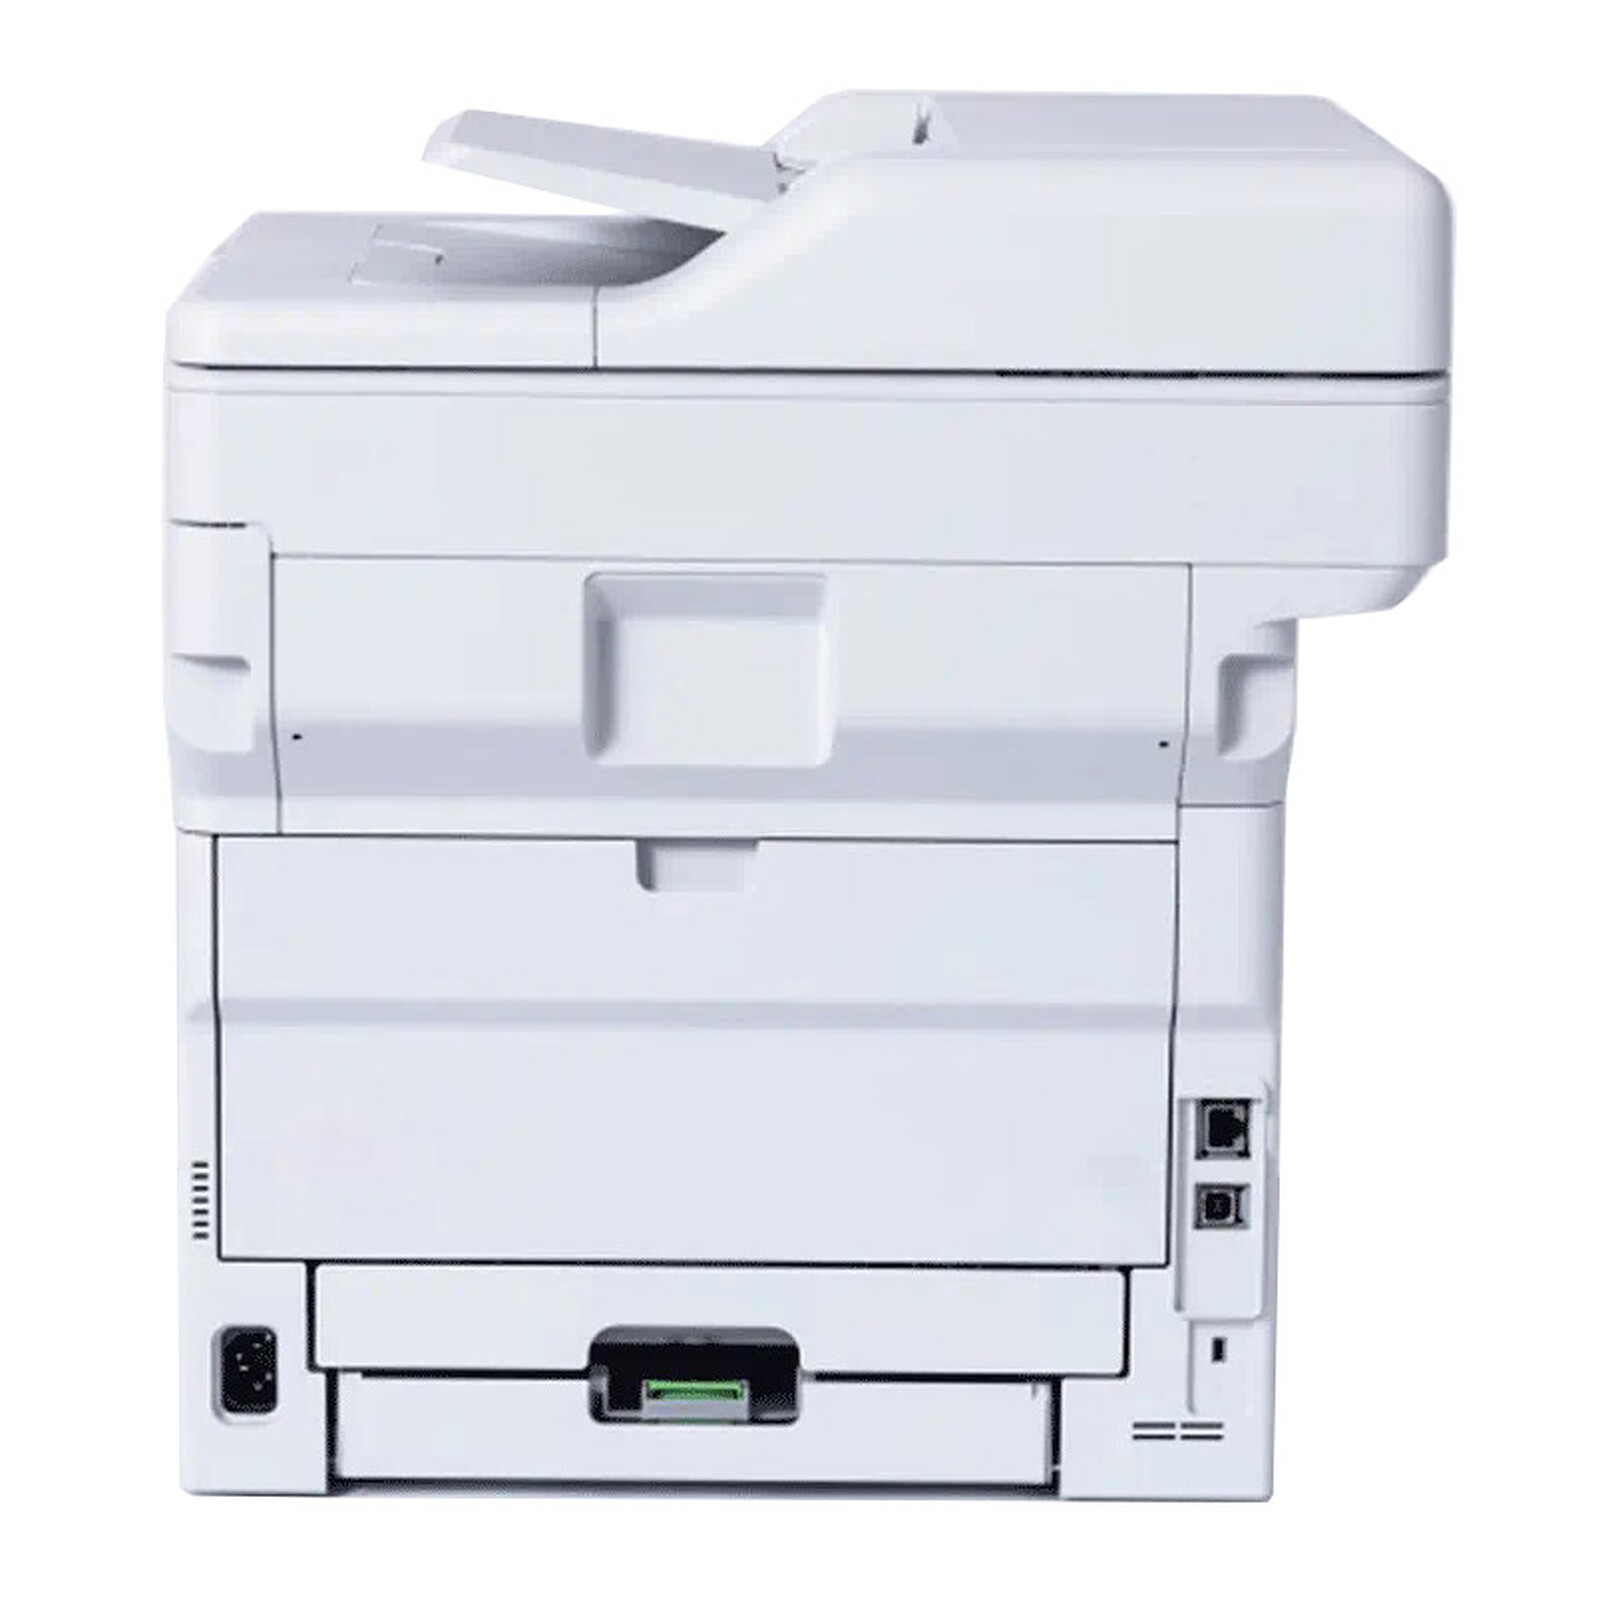 Brother DCP-L2620DW A4 Mono Multifunction Laser Printer (Wireless